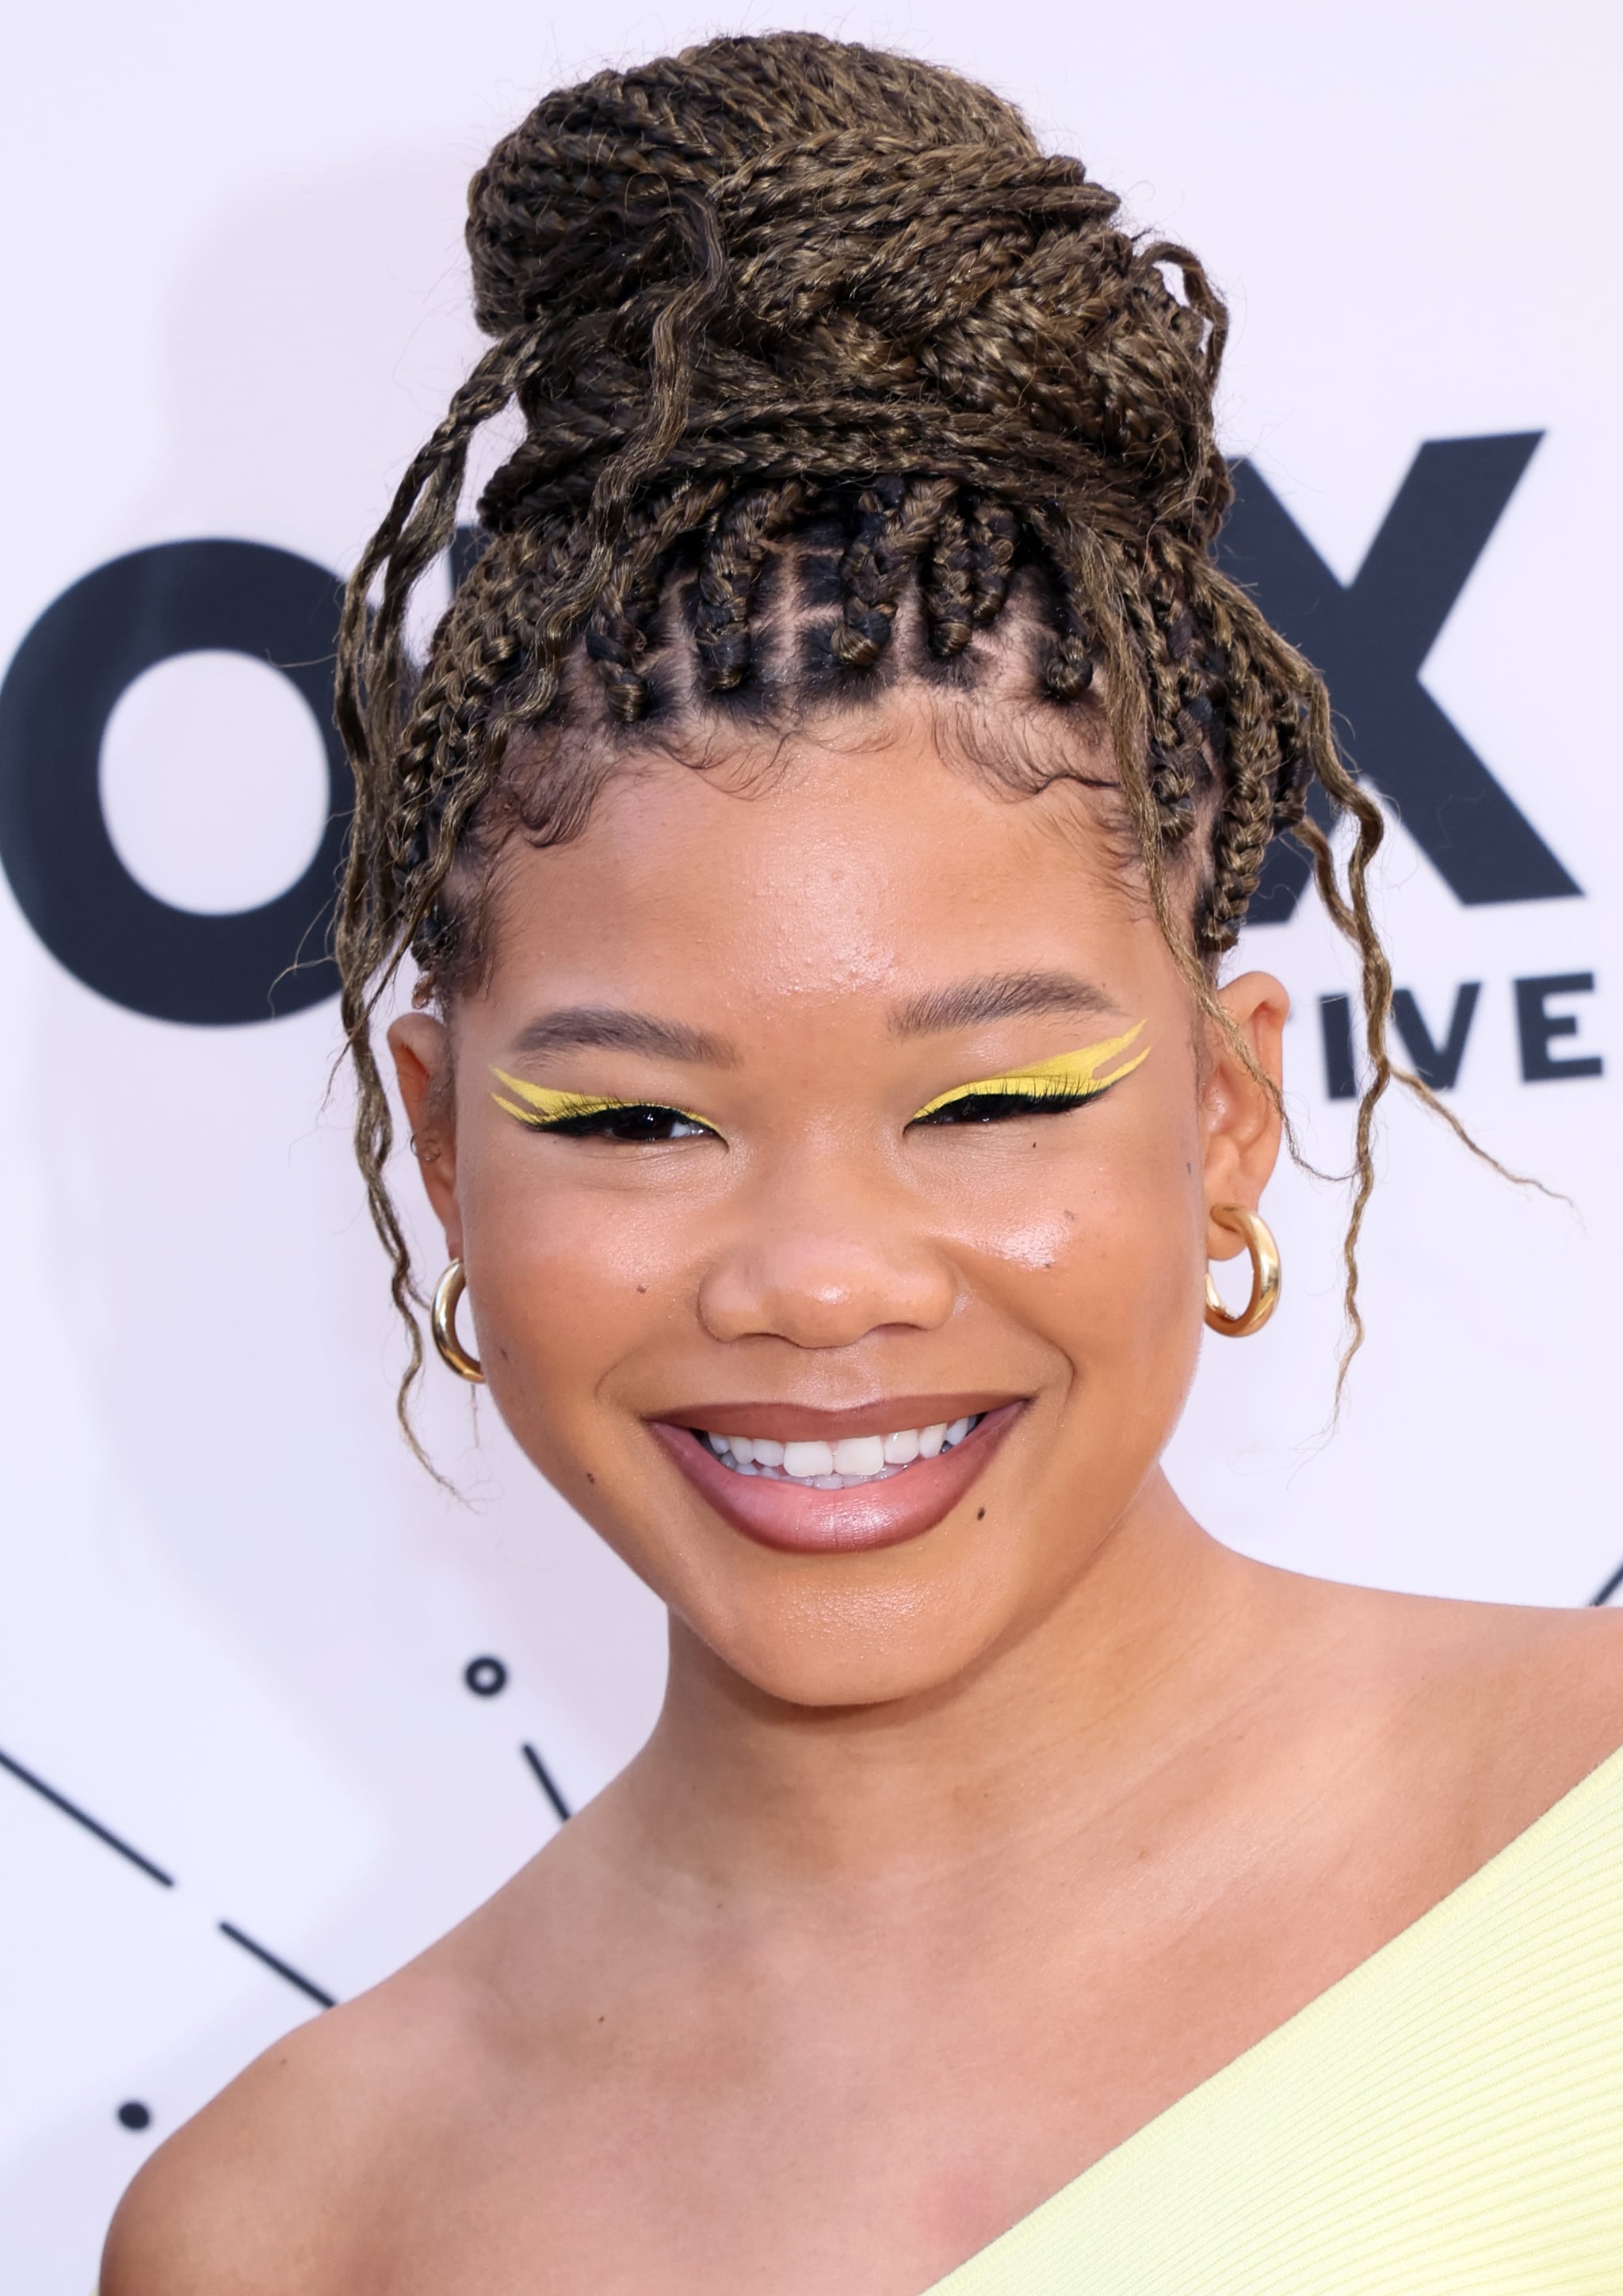 BEVERLY HILLS, CALIFORNIA - MARCH 24: Storm Reid attends the ESSENCE 15th Anniversary Black Women In Hollywood Awards highlighting 